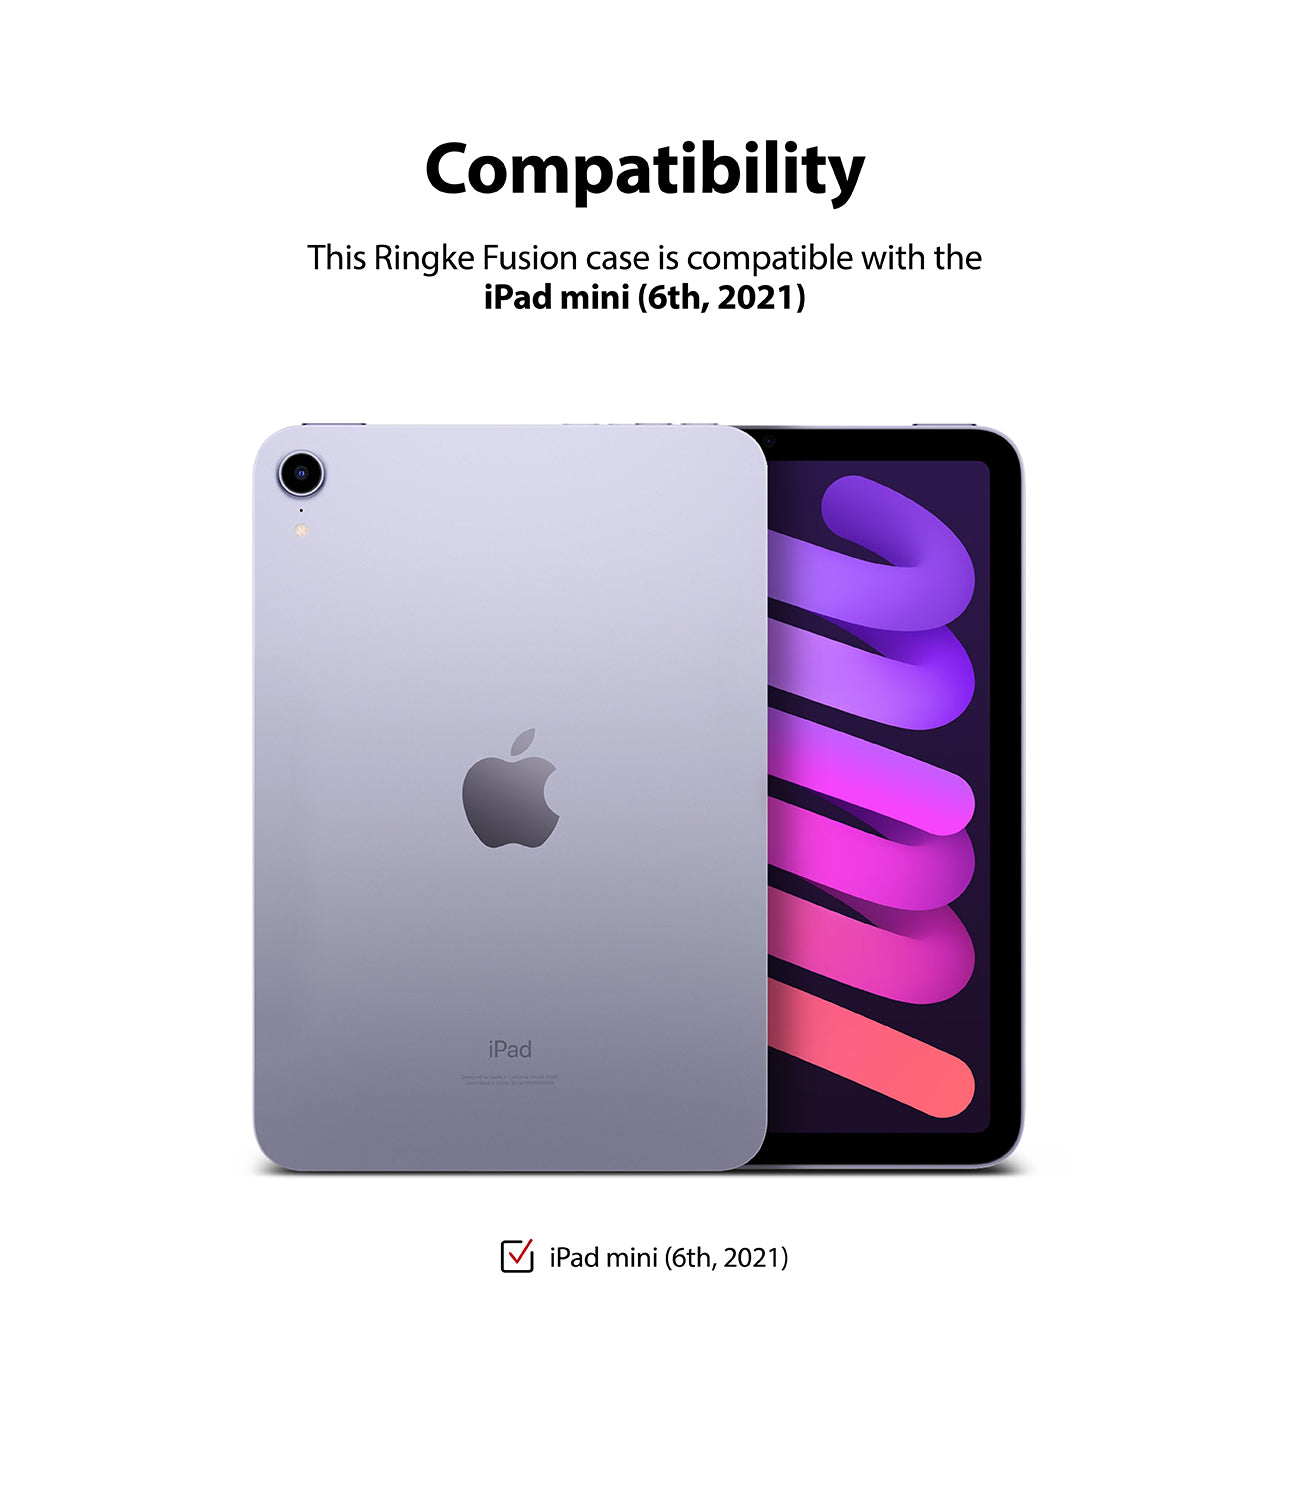 Compatible with iPad mini 6th Generation